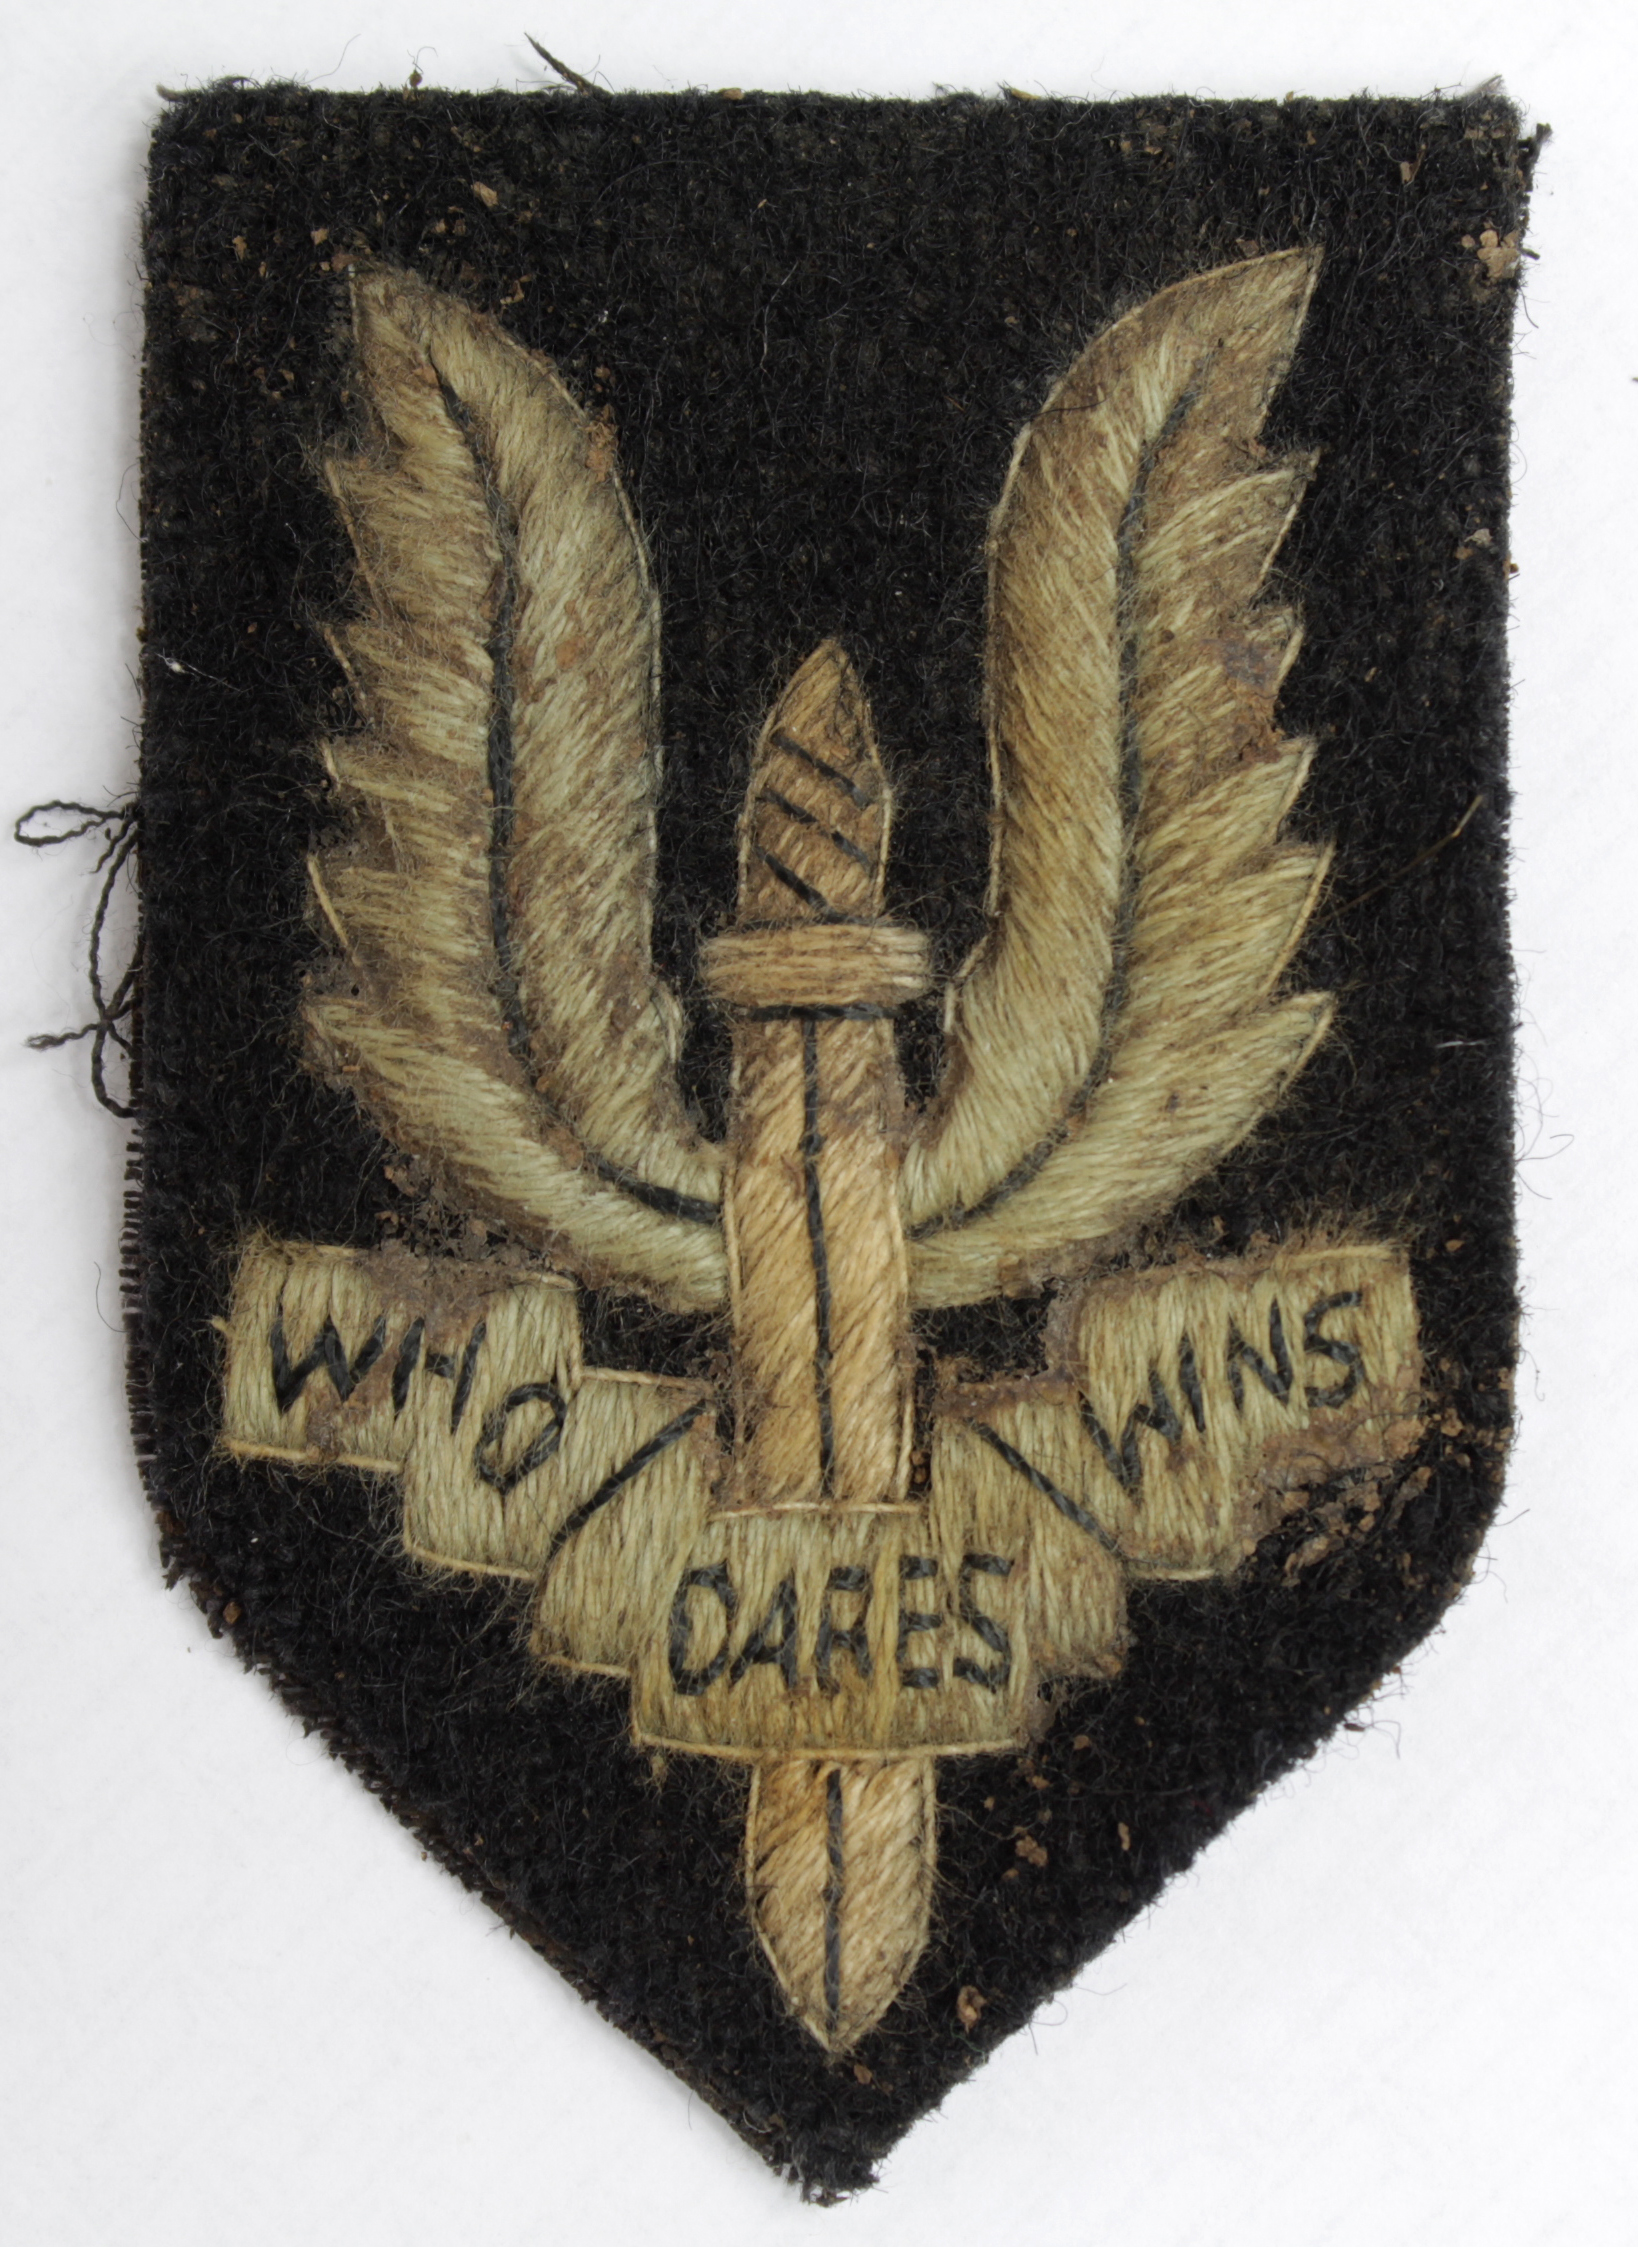 Badge a larger sized WW2 SAS Beret badge, grubby but would clean.